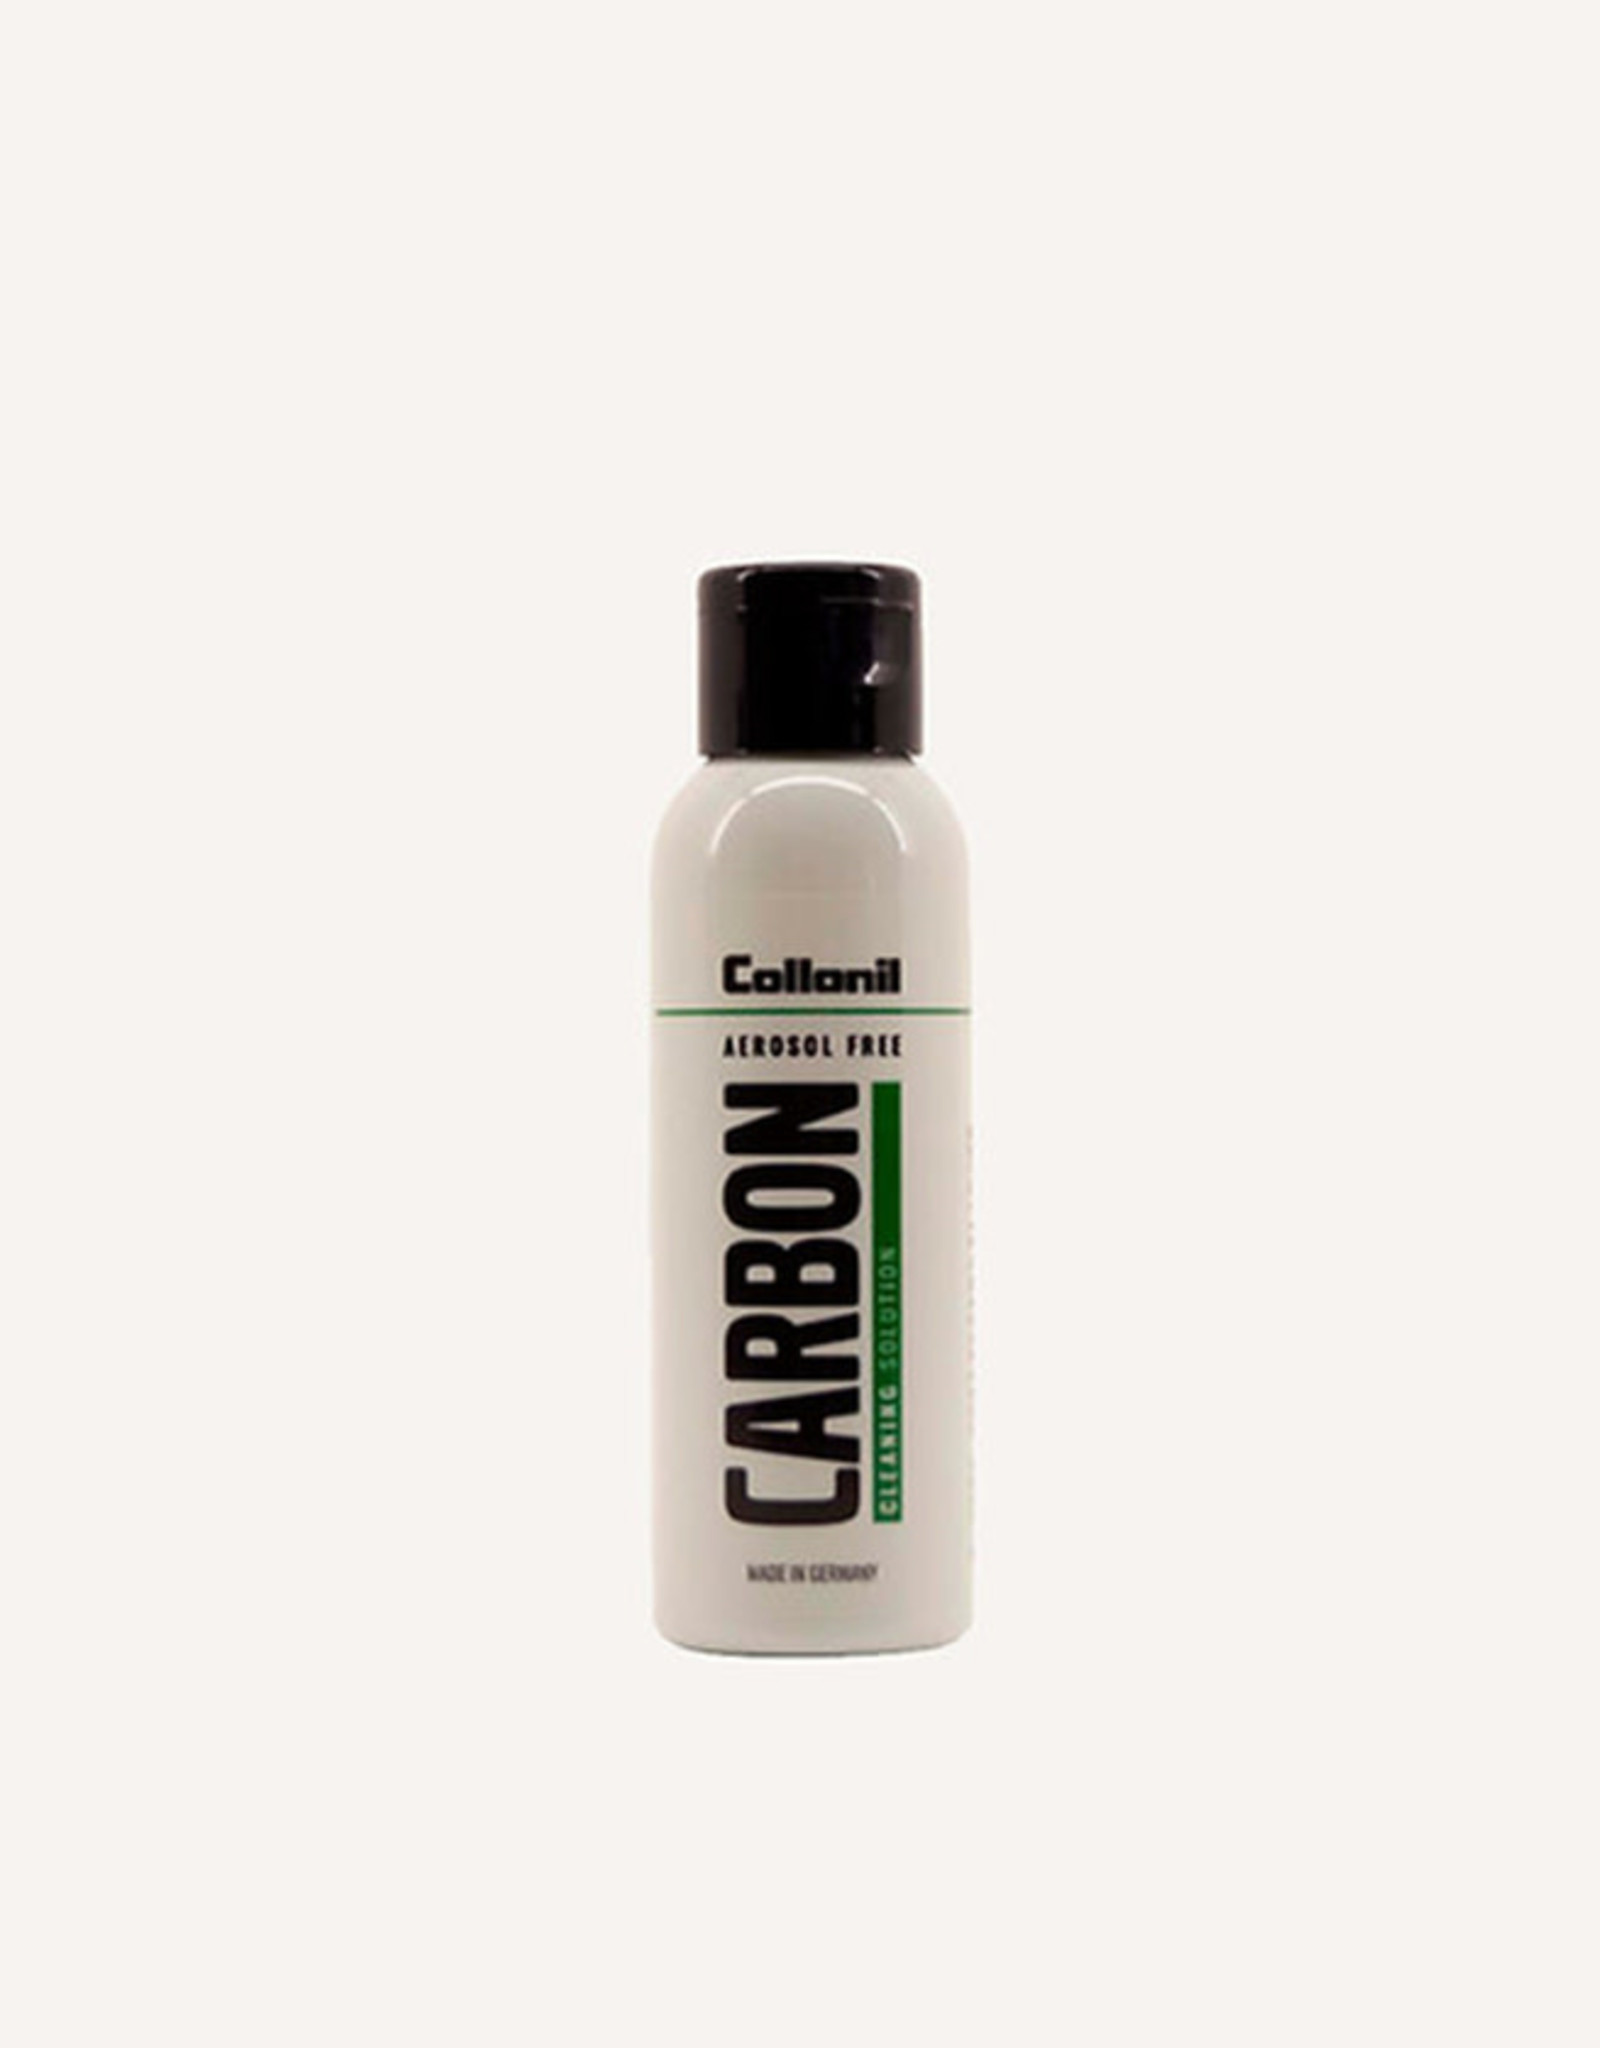 The Sticky Sis Club Collonil Carbon lab 100ml-cleaning solution